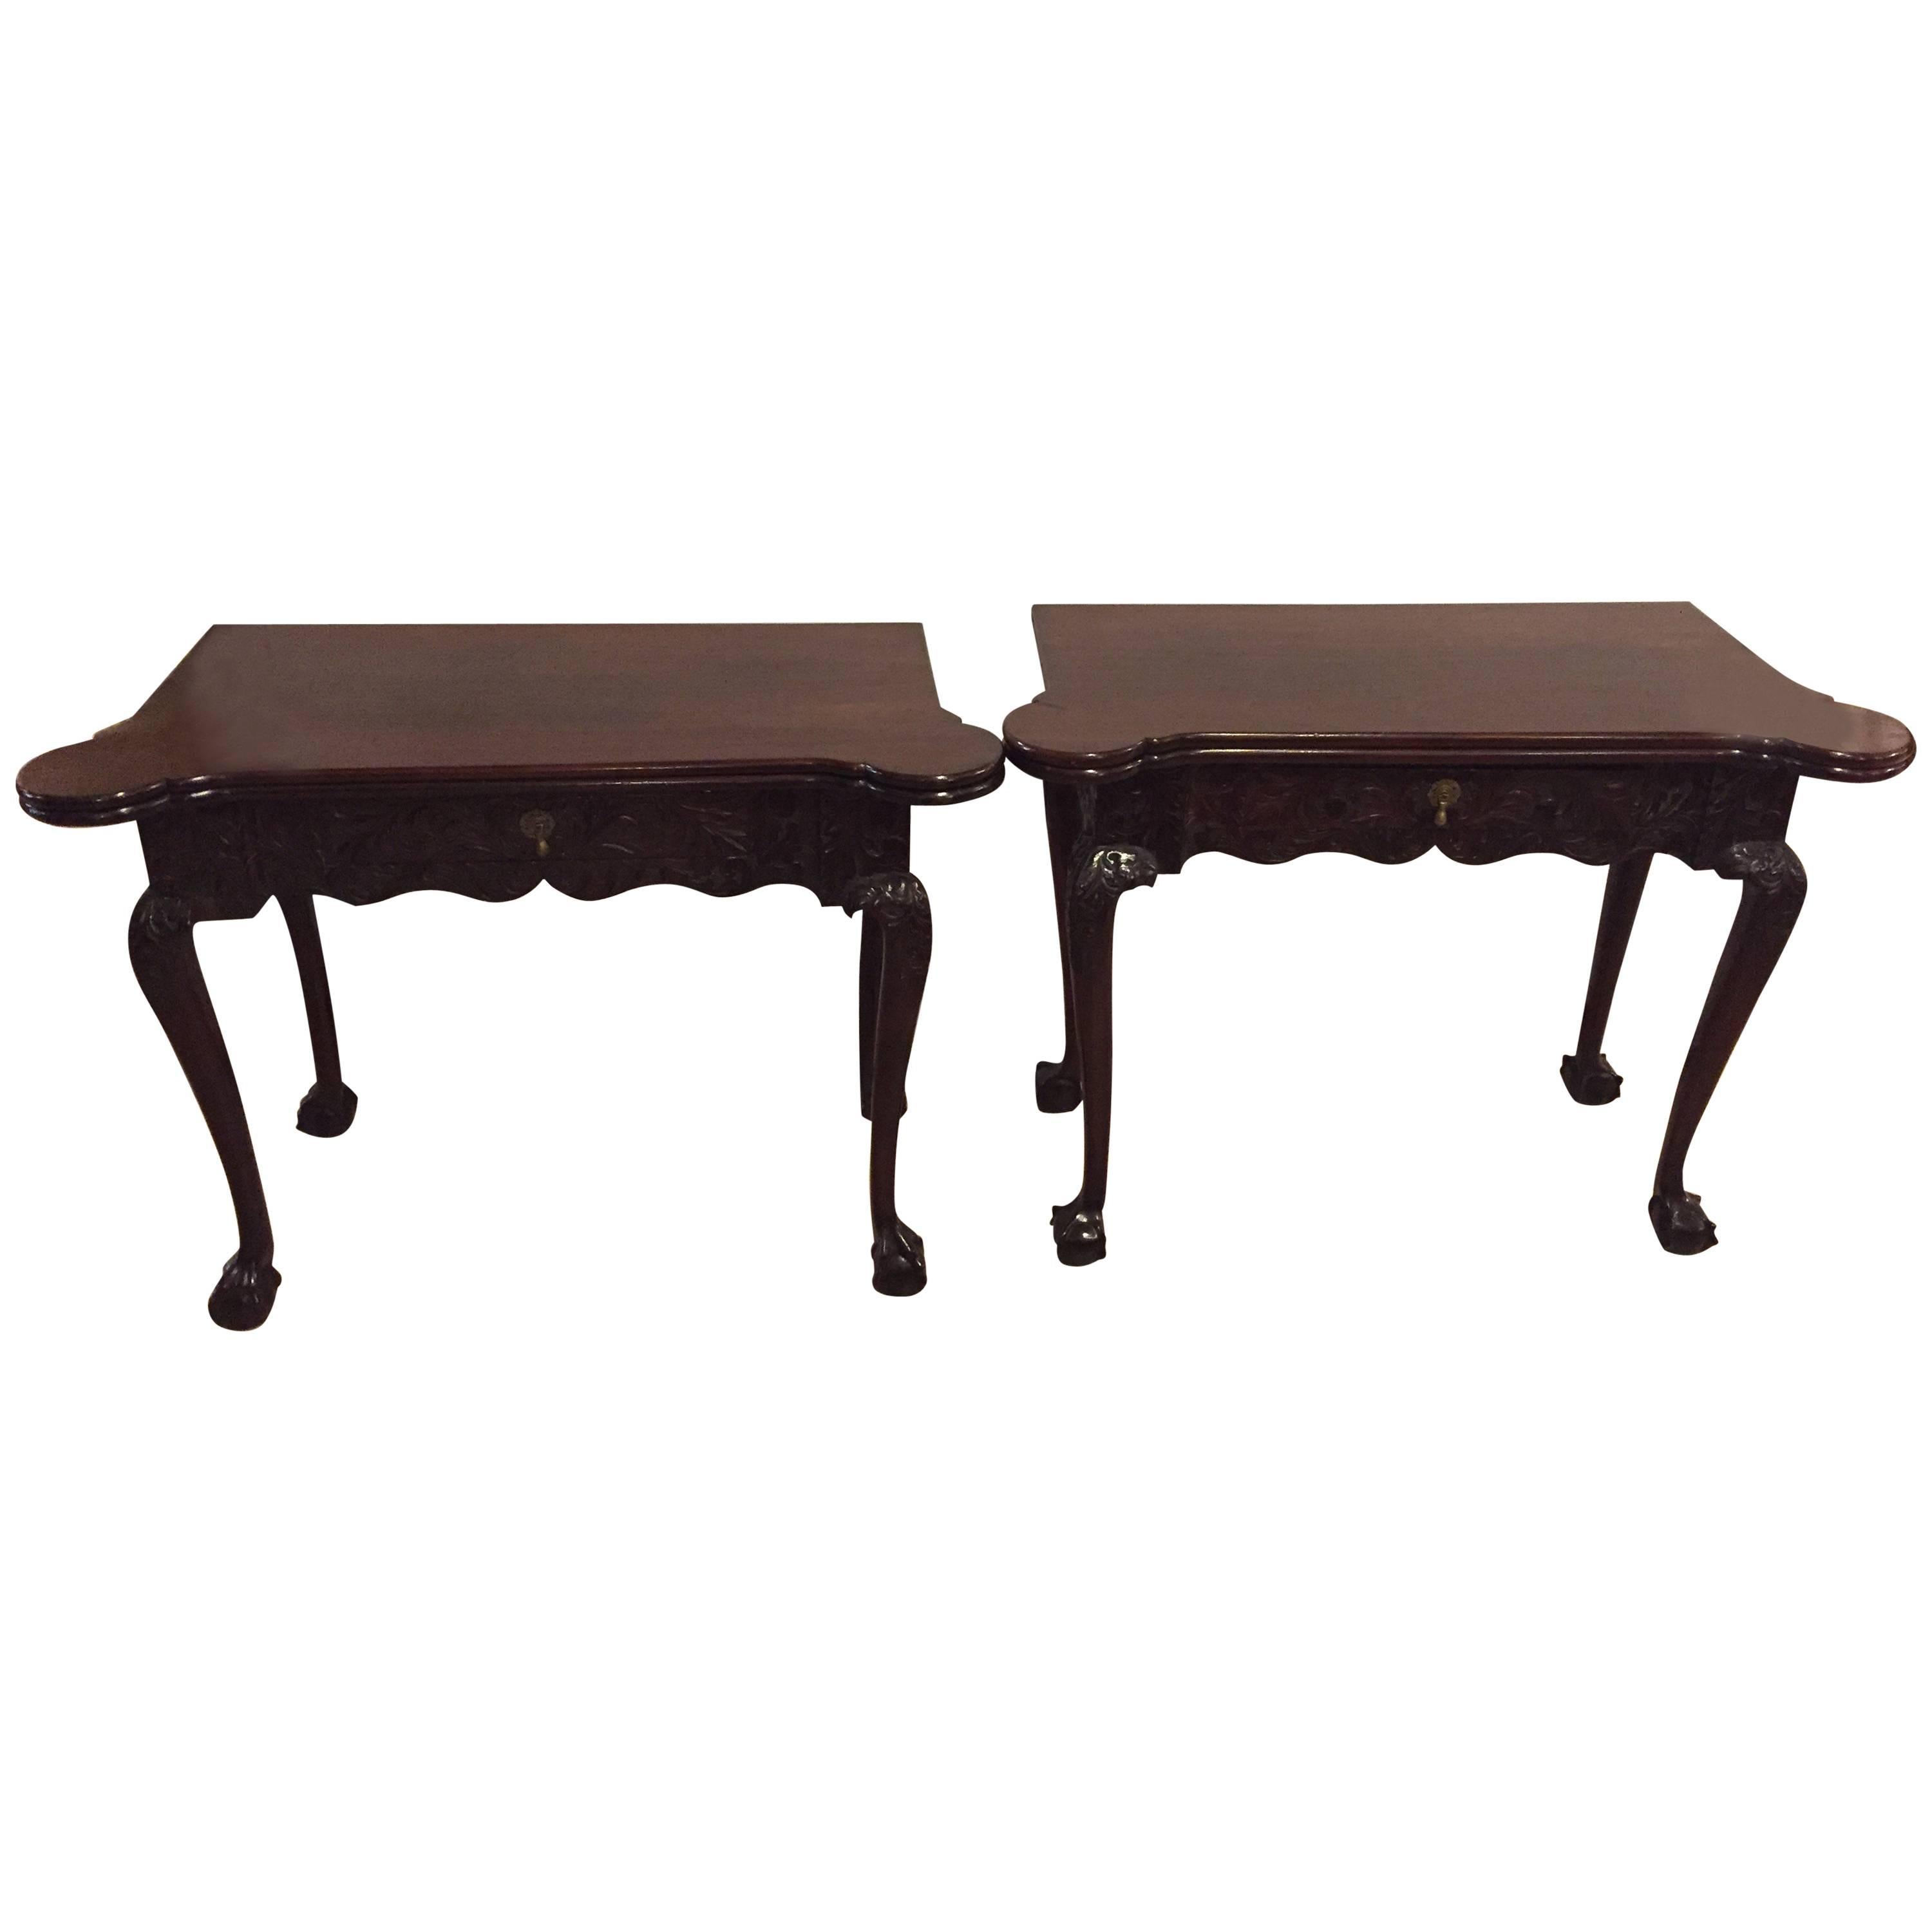 Period 1820s Irish Card / Tea Tables Solid Mahogany with Later Carvings For Sale